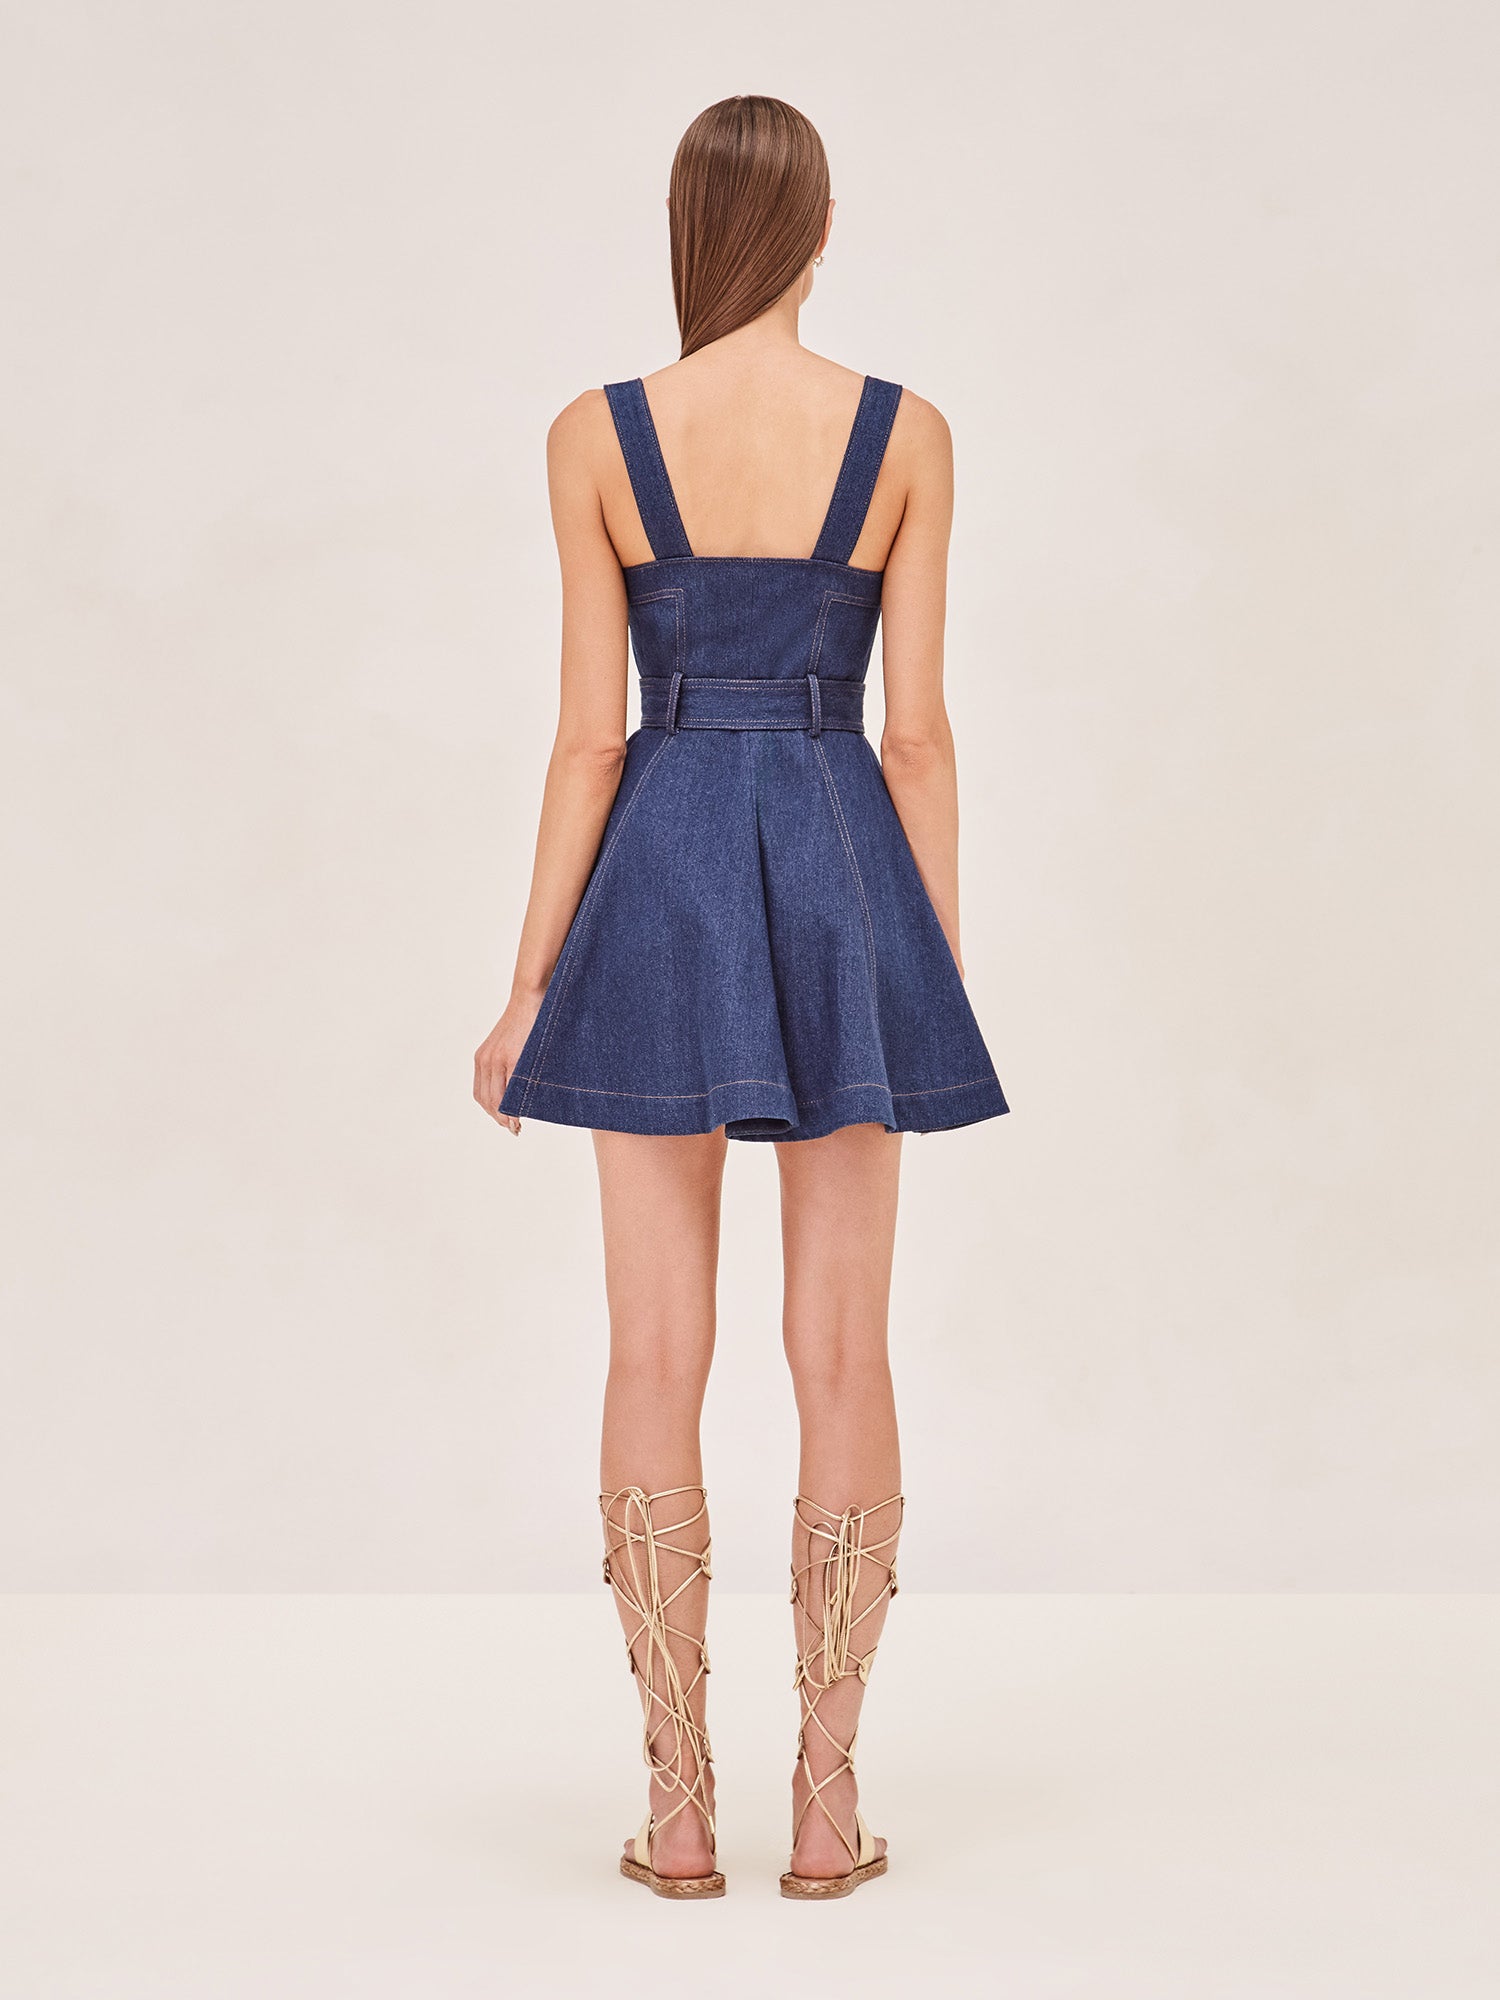 ALEXIS Danni sleeveless mini dress in denim with waist sash belt and gold button accents. back image